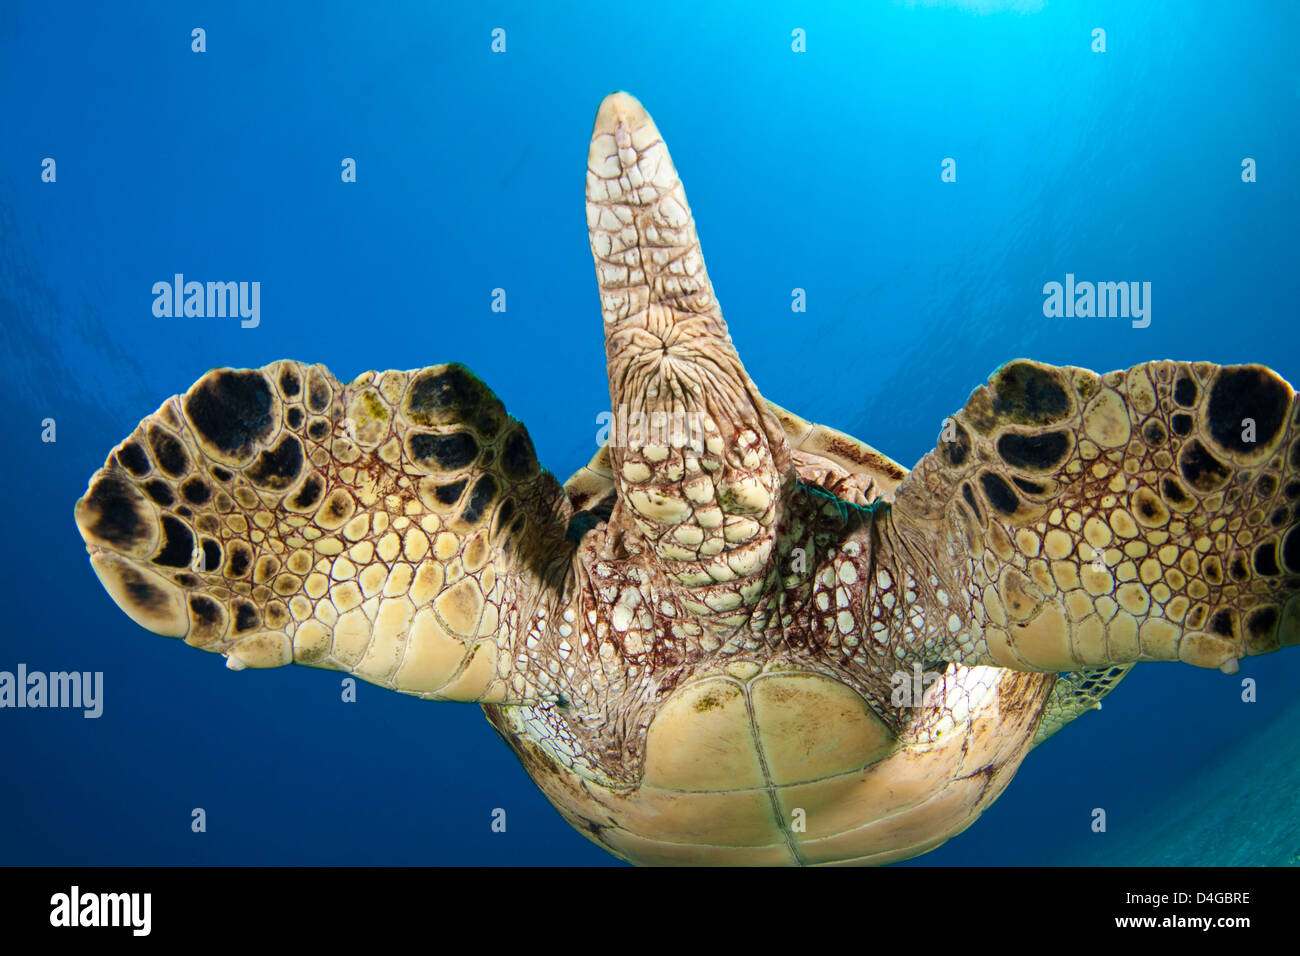 The tail end view of a green sea turtle, Chelonia mydas, an endangered species. Hawaii. Stock Photo